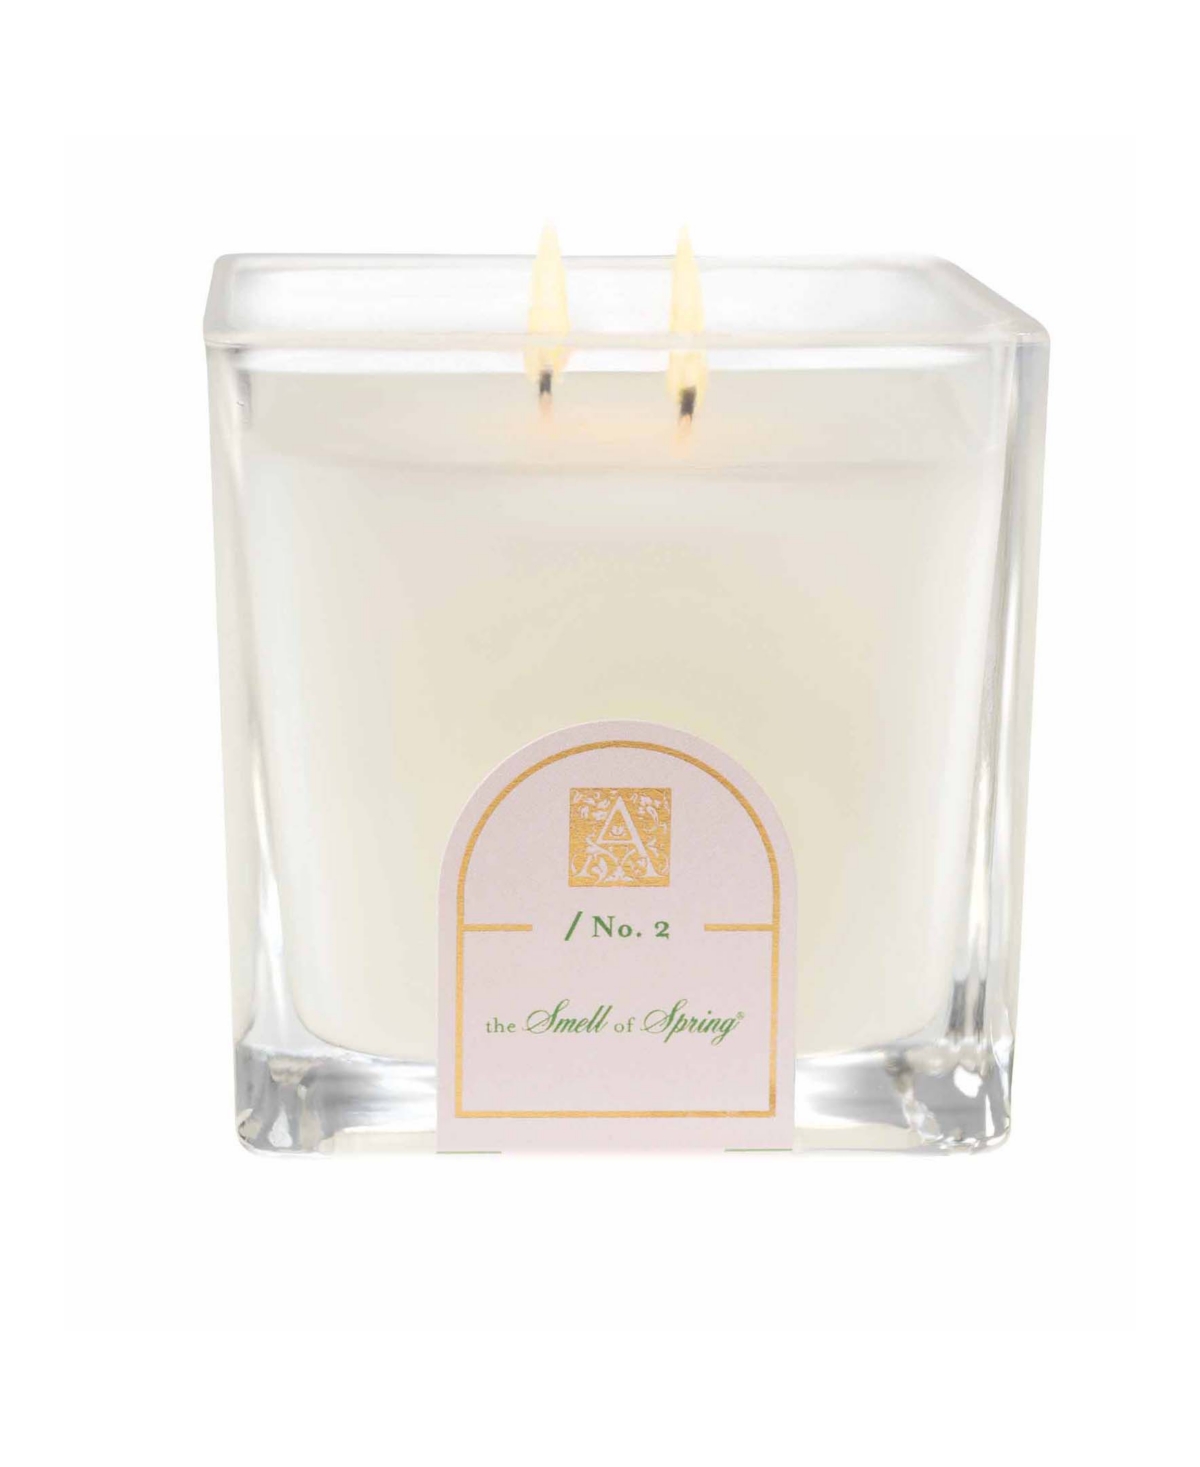 Aromatique The Smell of Spring 12-oz. Medium Cube Candle